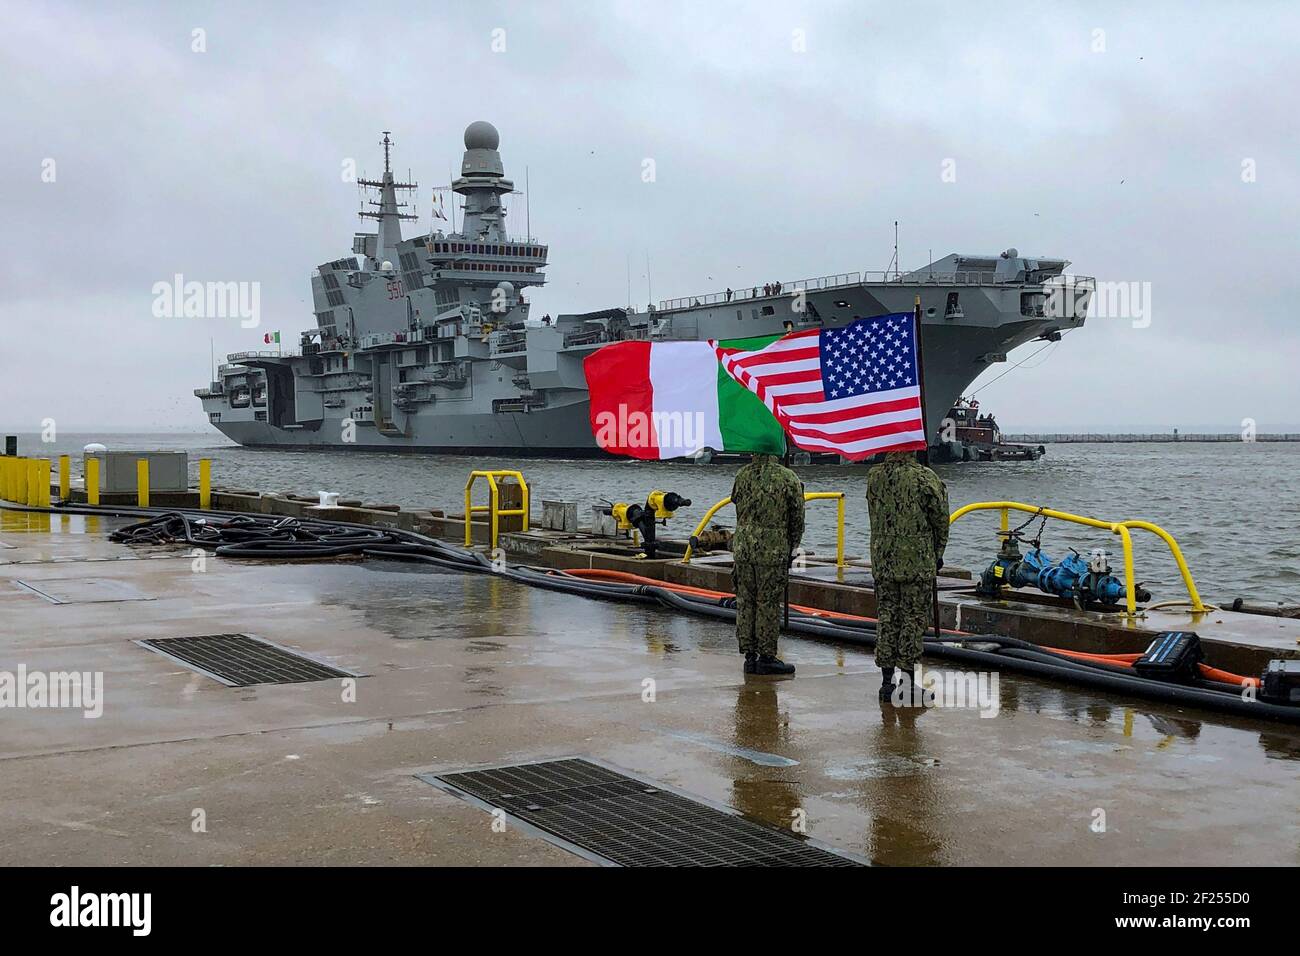 Italian Navy flagship aircraft carrier ITS Cavour arrives at U.S. Naval Station Norfolk for a port visit February 13, 2021 in Norfolk, Virginia. The Cavour, a short takeoff and vertical landing carrier will be taking part in F-35B STOVL aircraft qualifications with the U.S. Marine Corps. Stock Photo